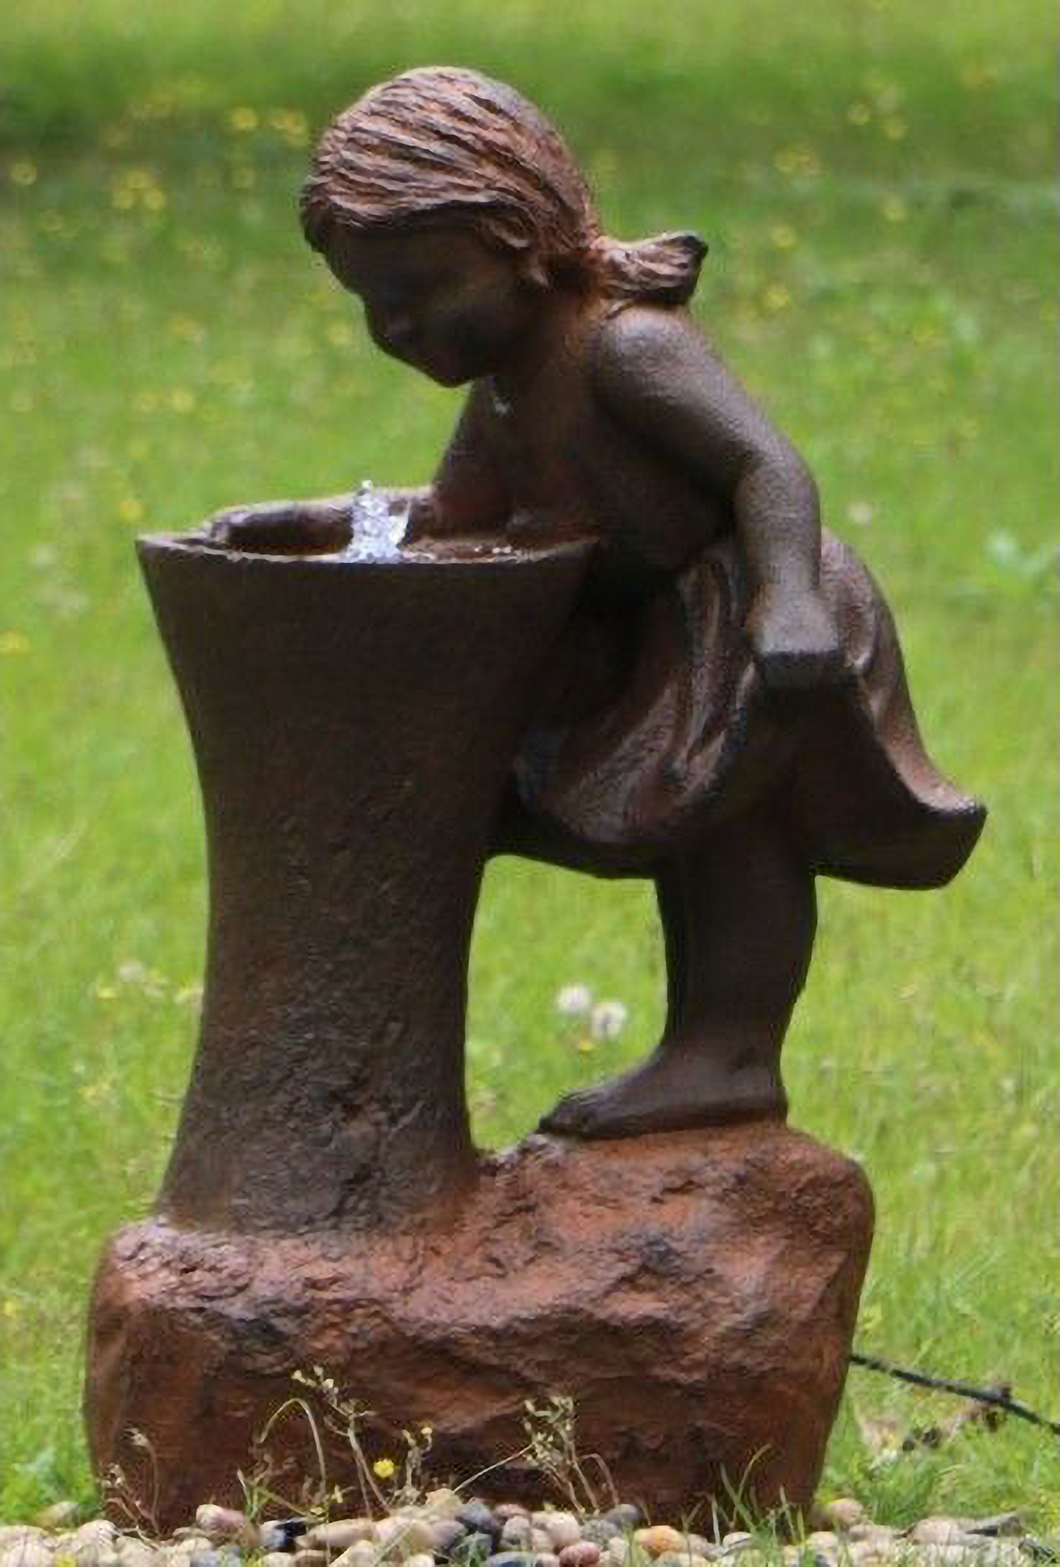 Girl at Water Fountain with water bubbling in a garden setting